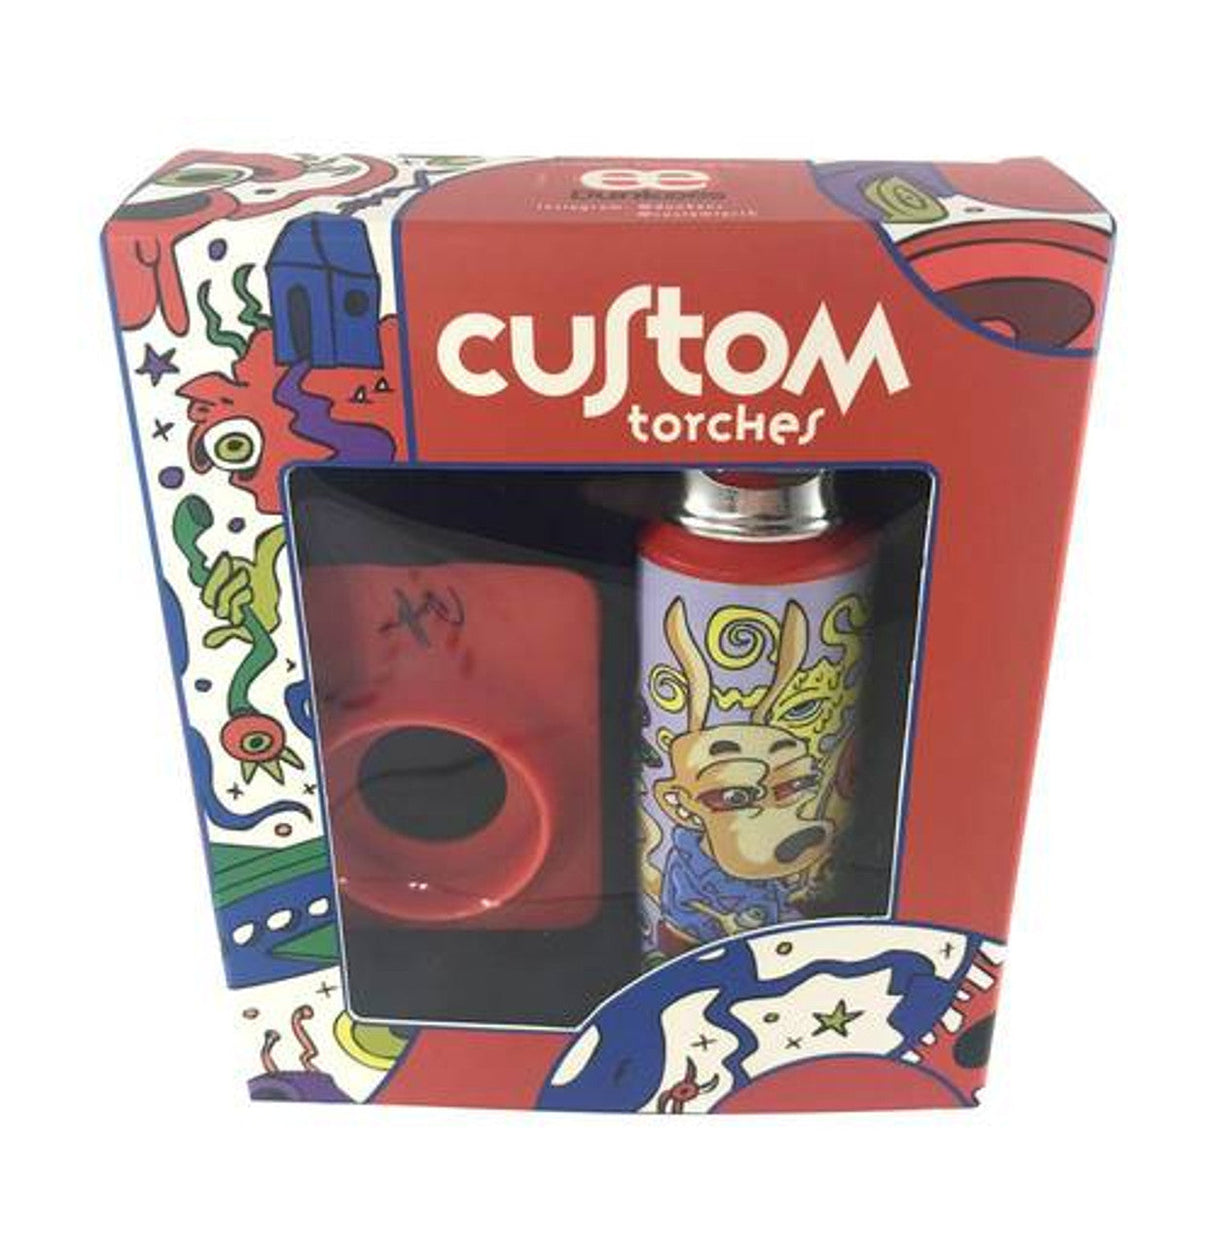 Dunkees Custom 6" Torch - Old School Way, vibrant cartoon artwork, packaged front view